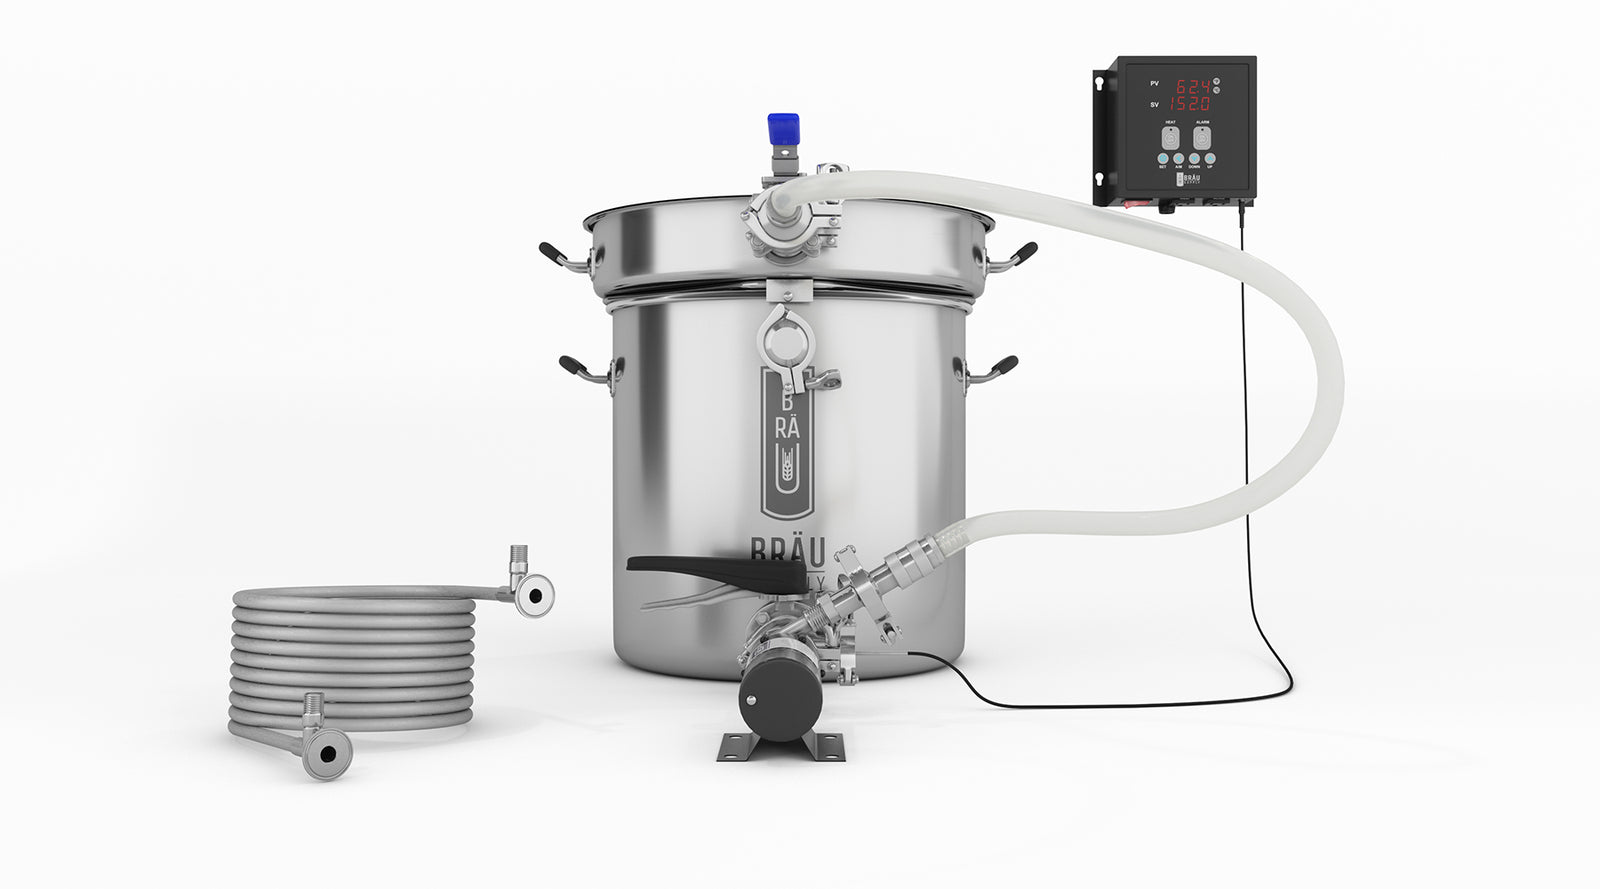 Homebrew: Building an automated brew kettle